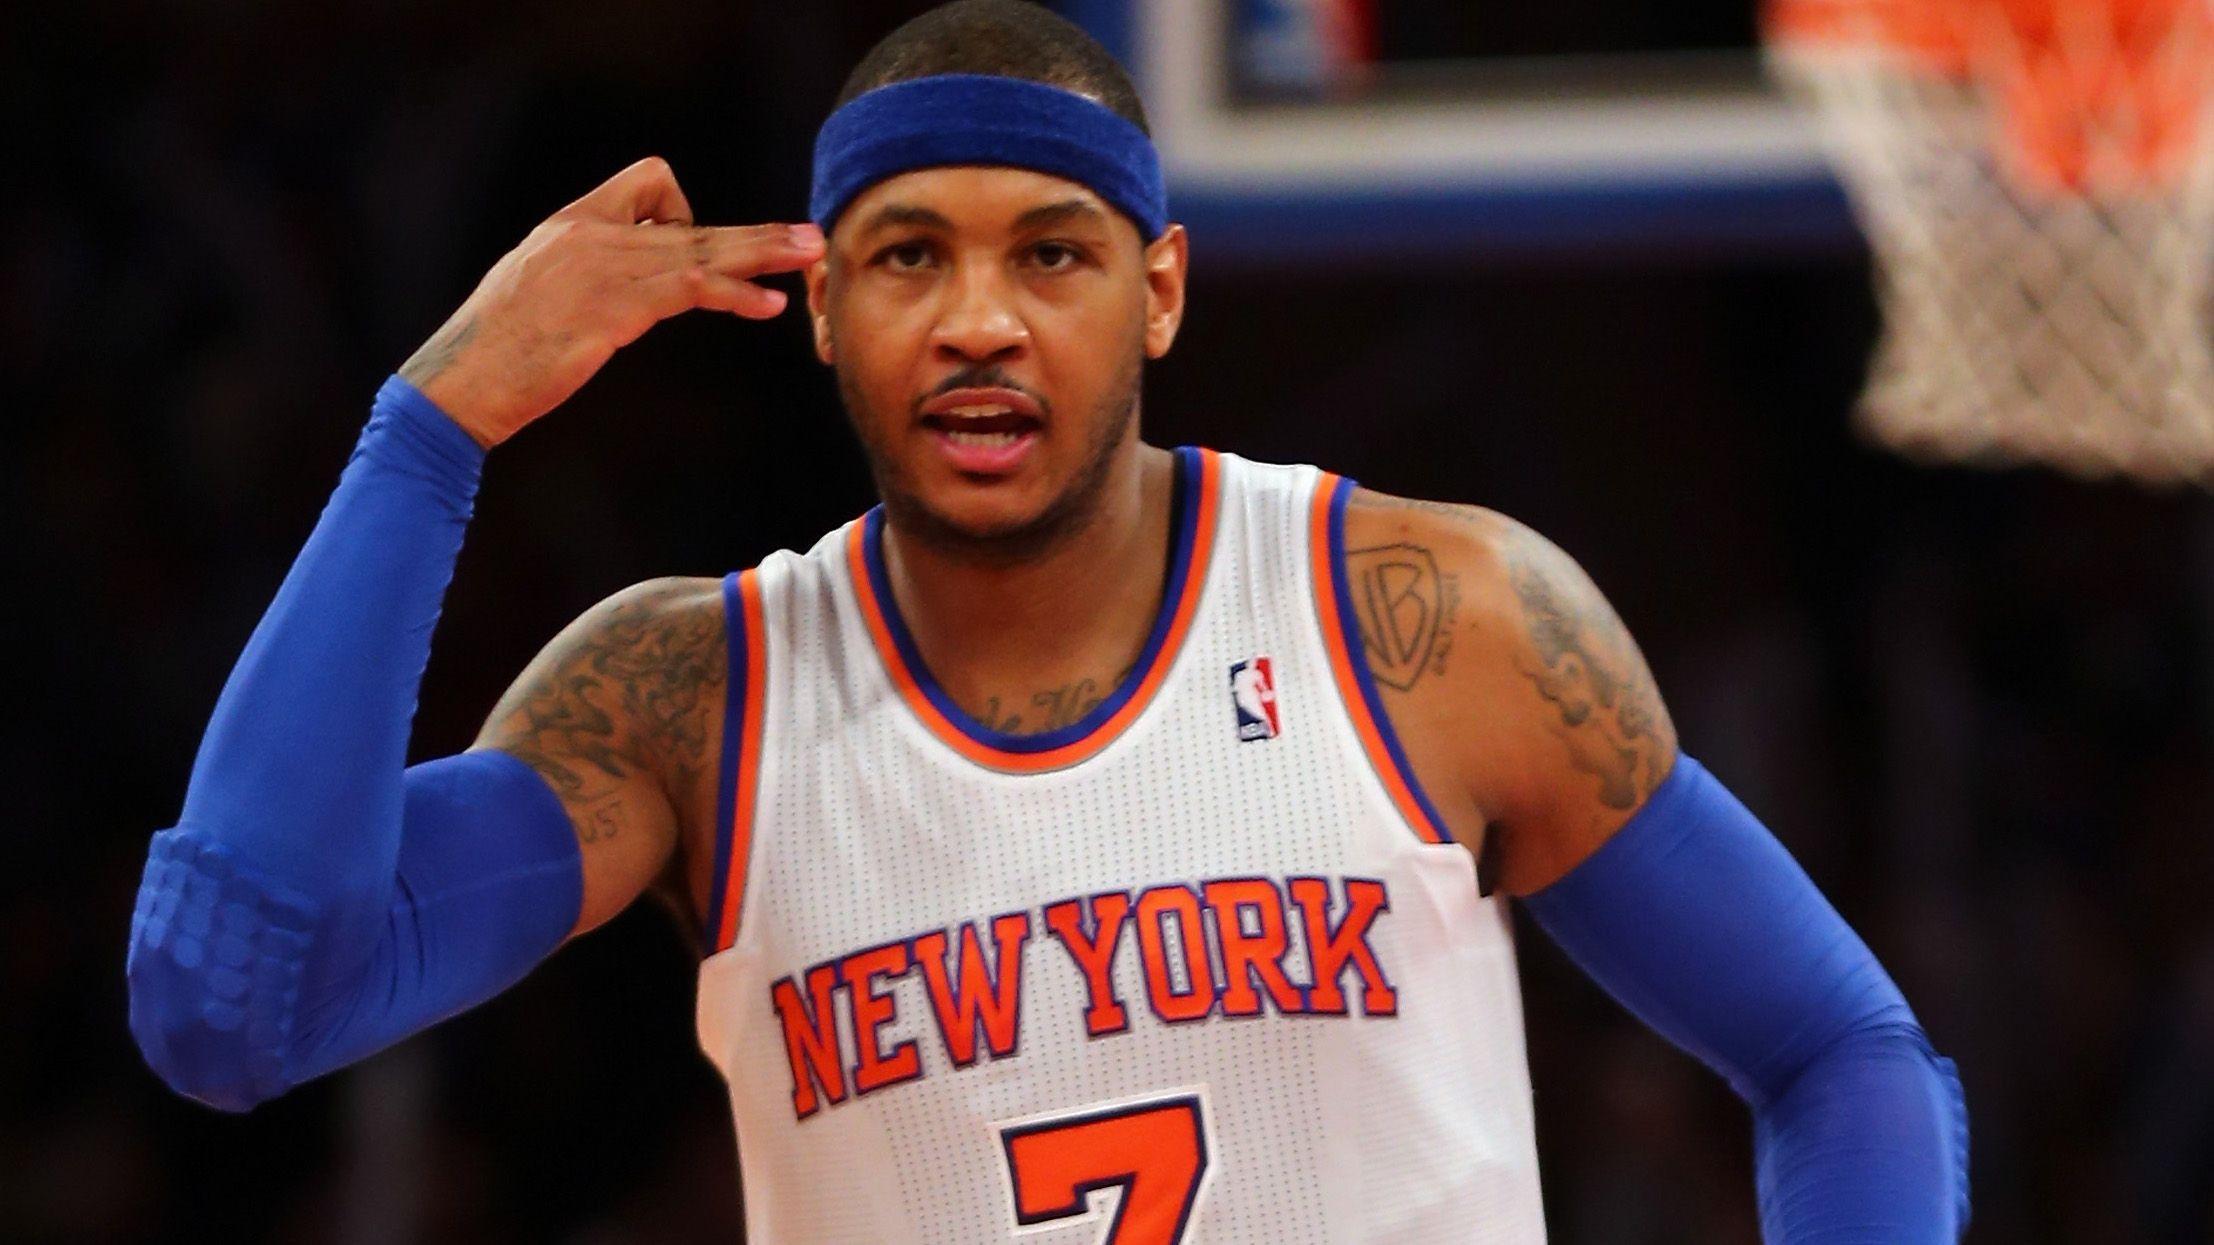 Carmelo Anthony Wallpapers High Resolution and Quality Download.